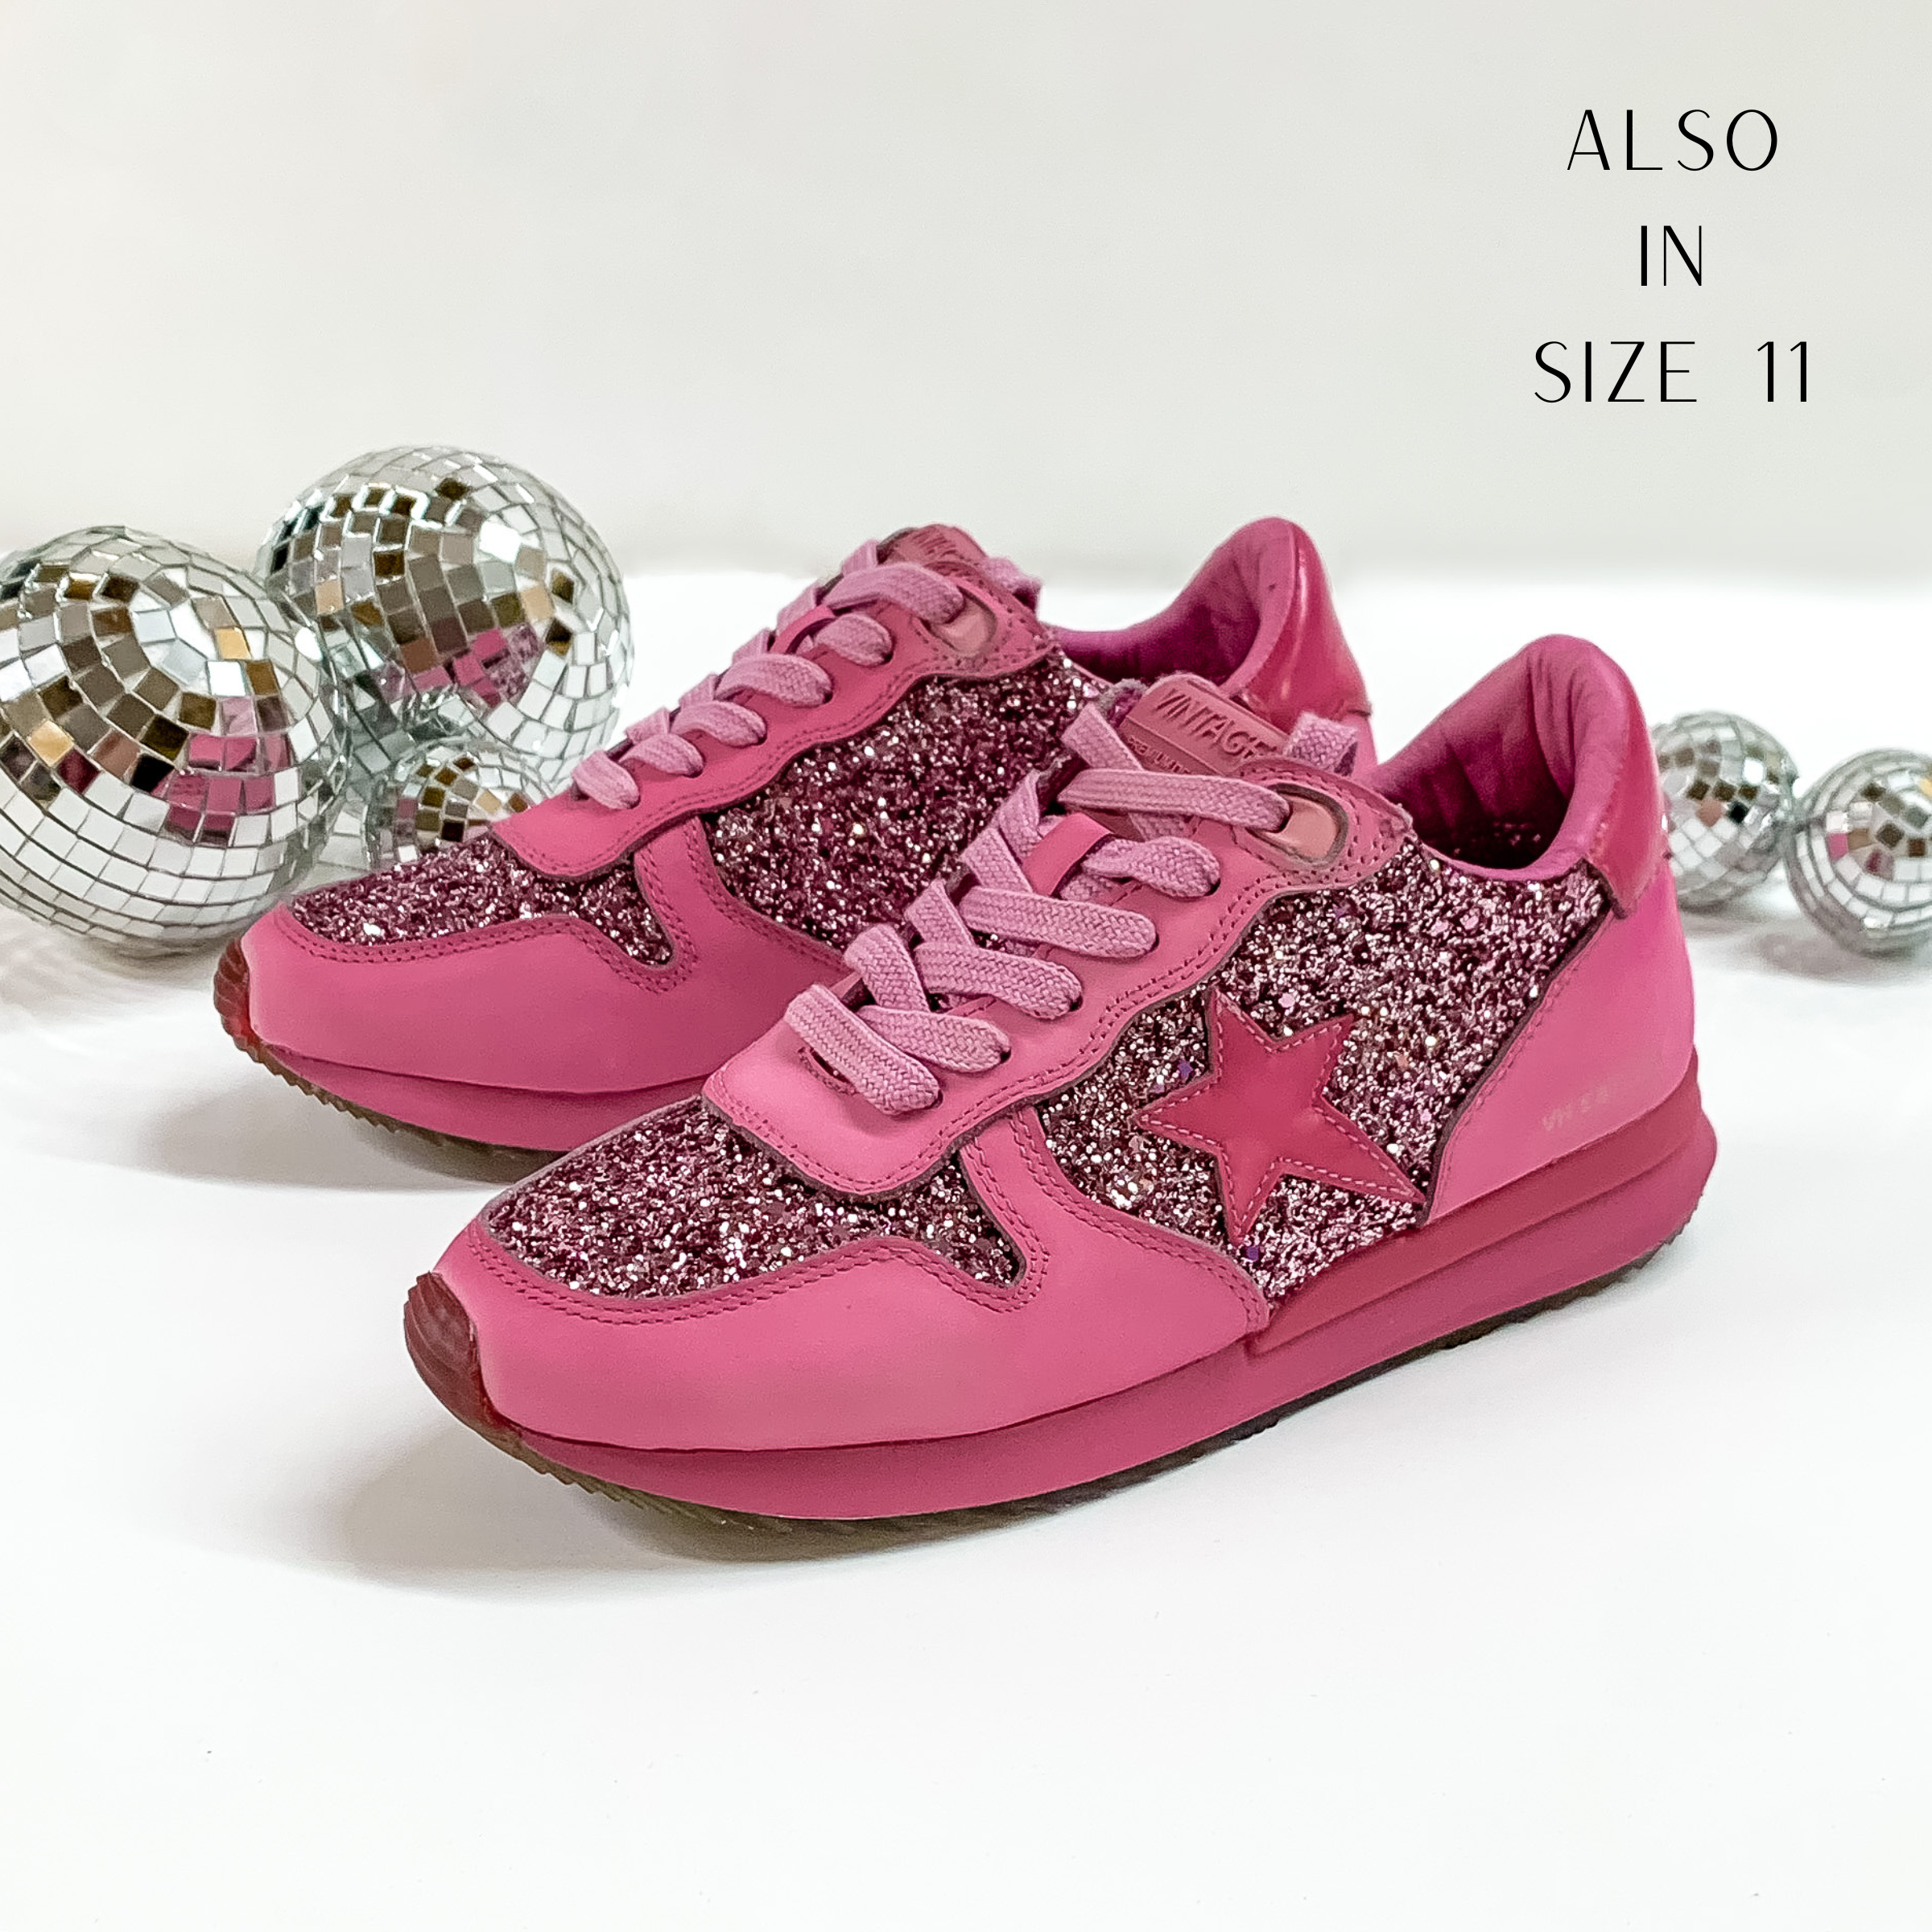 Dark pink colored tennis shoes and shoelaces. The tennis shoes also have a dark pink star patch on the side of the shoe and dark pink glitter throughout. These shoes are pictured on a white background with disco balls behind them. 